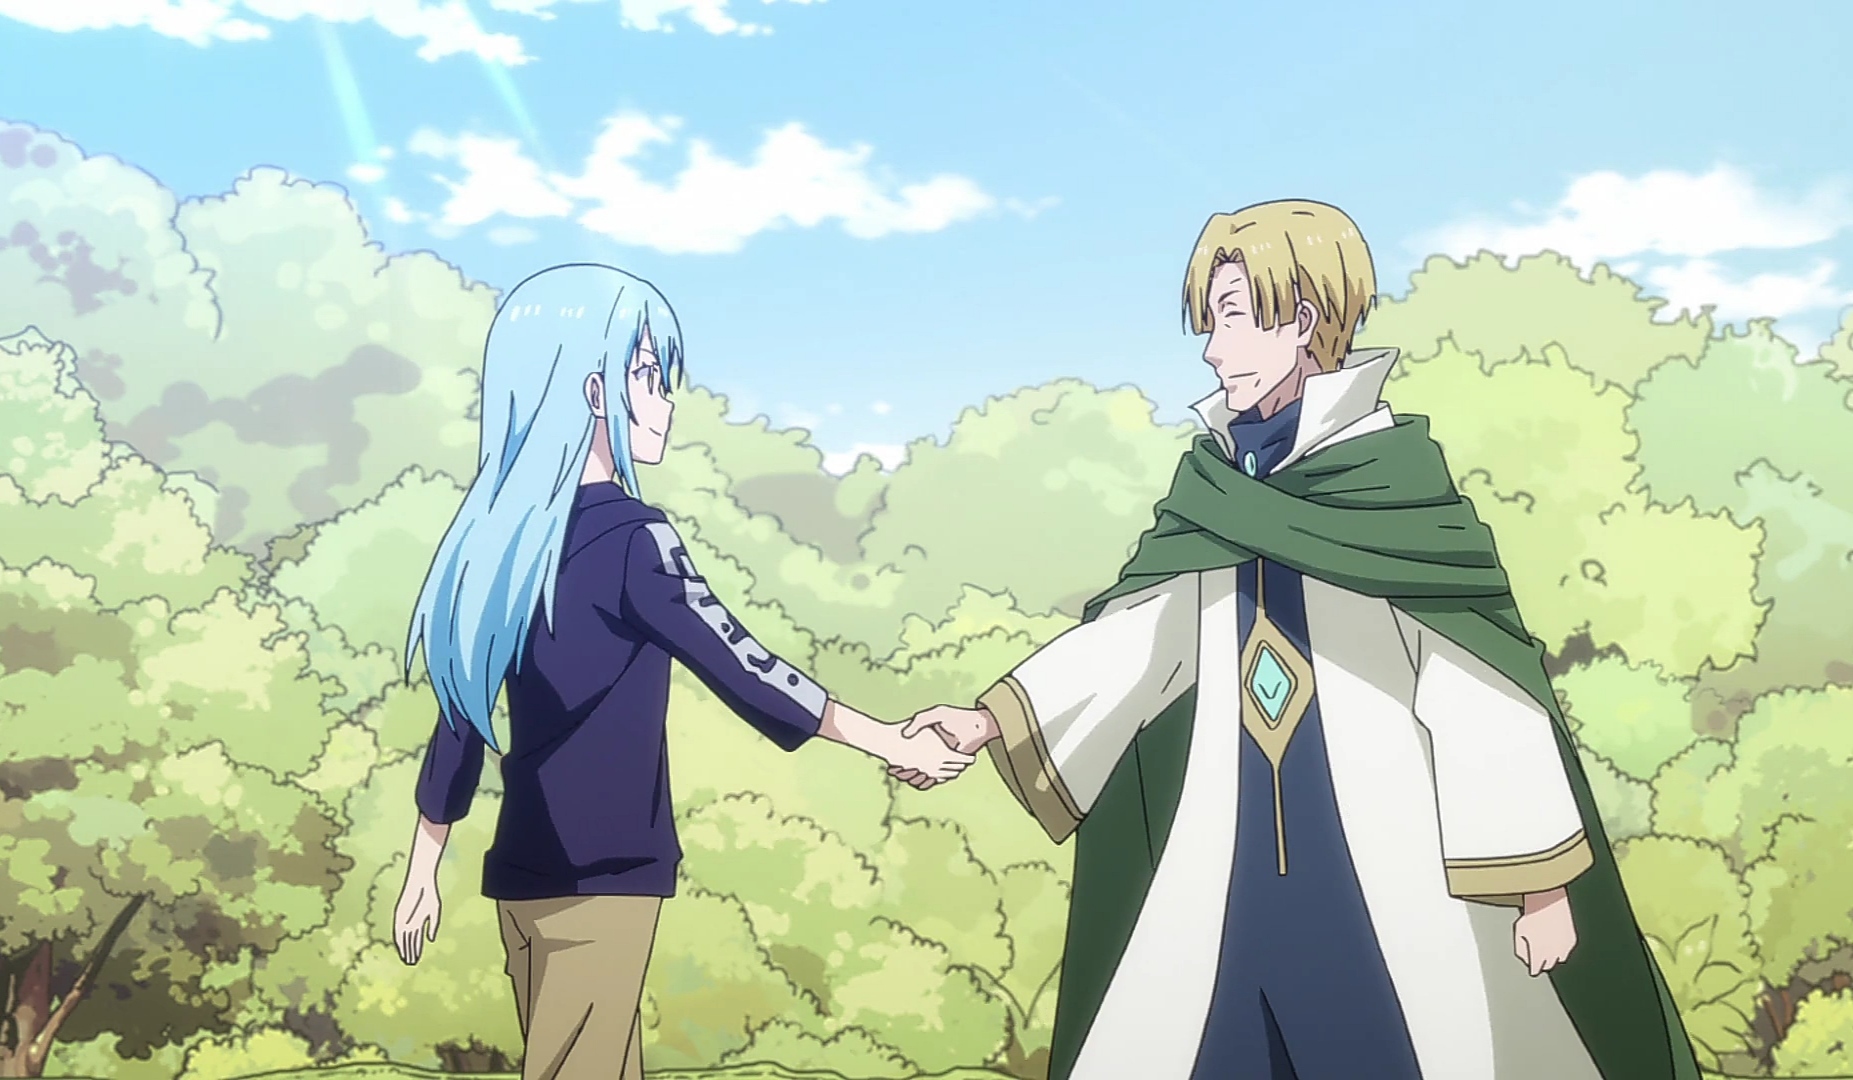 That Time I Got Reincarnated as a Slime 39: Great Power, Great